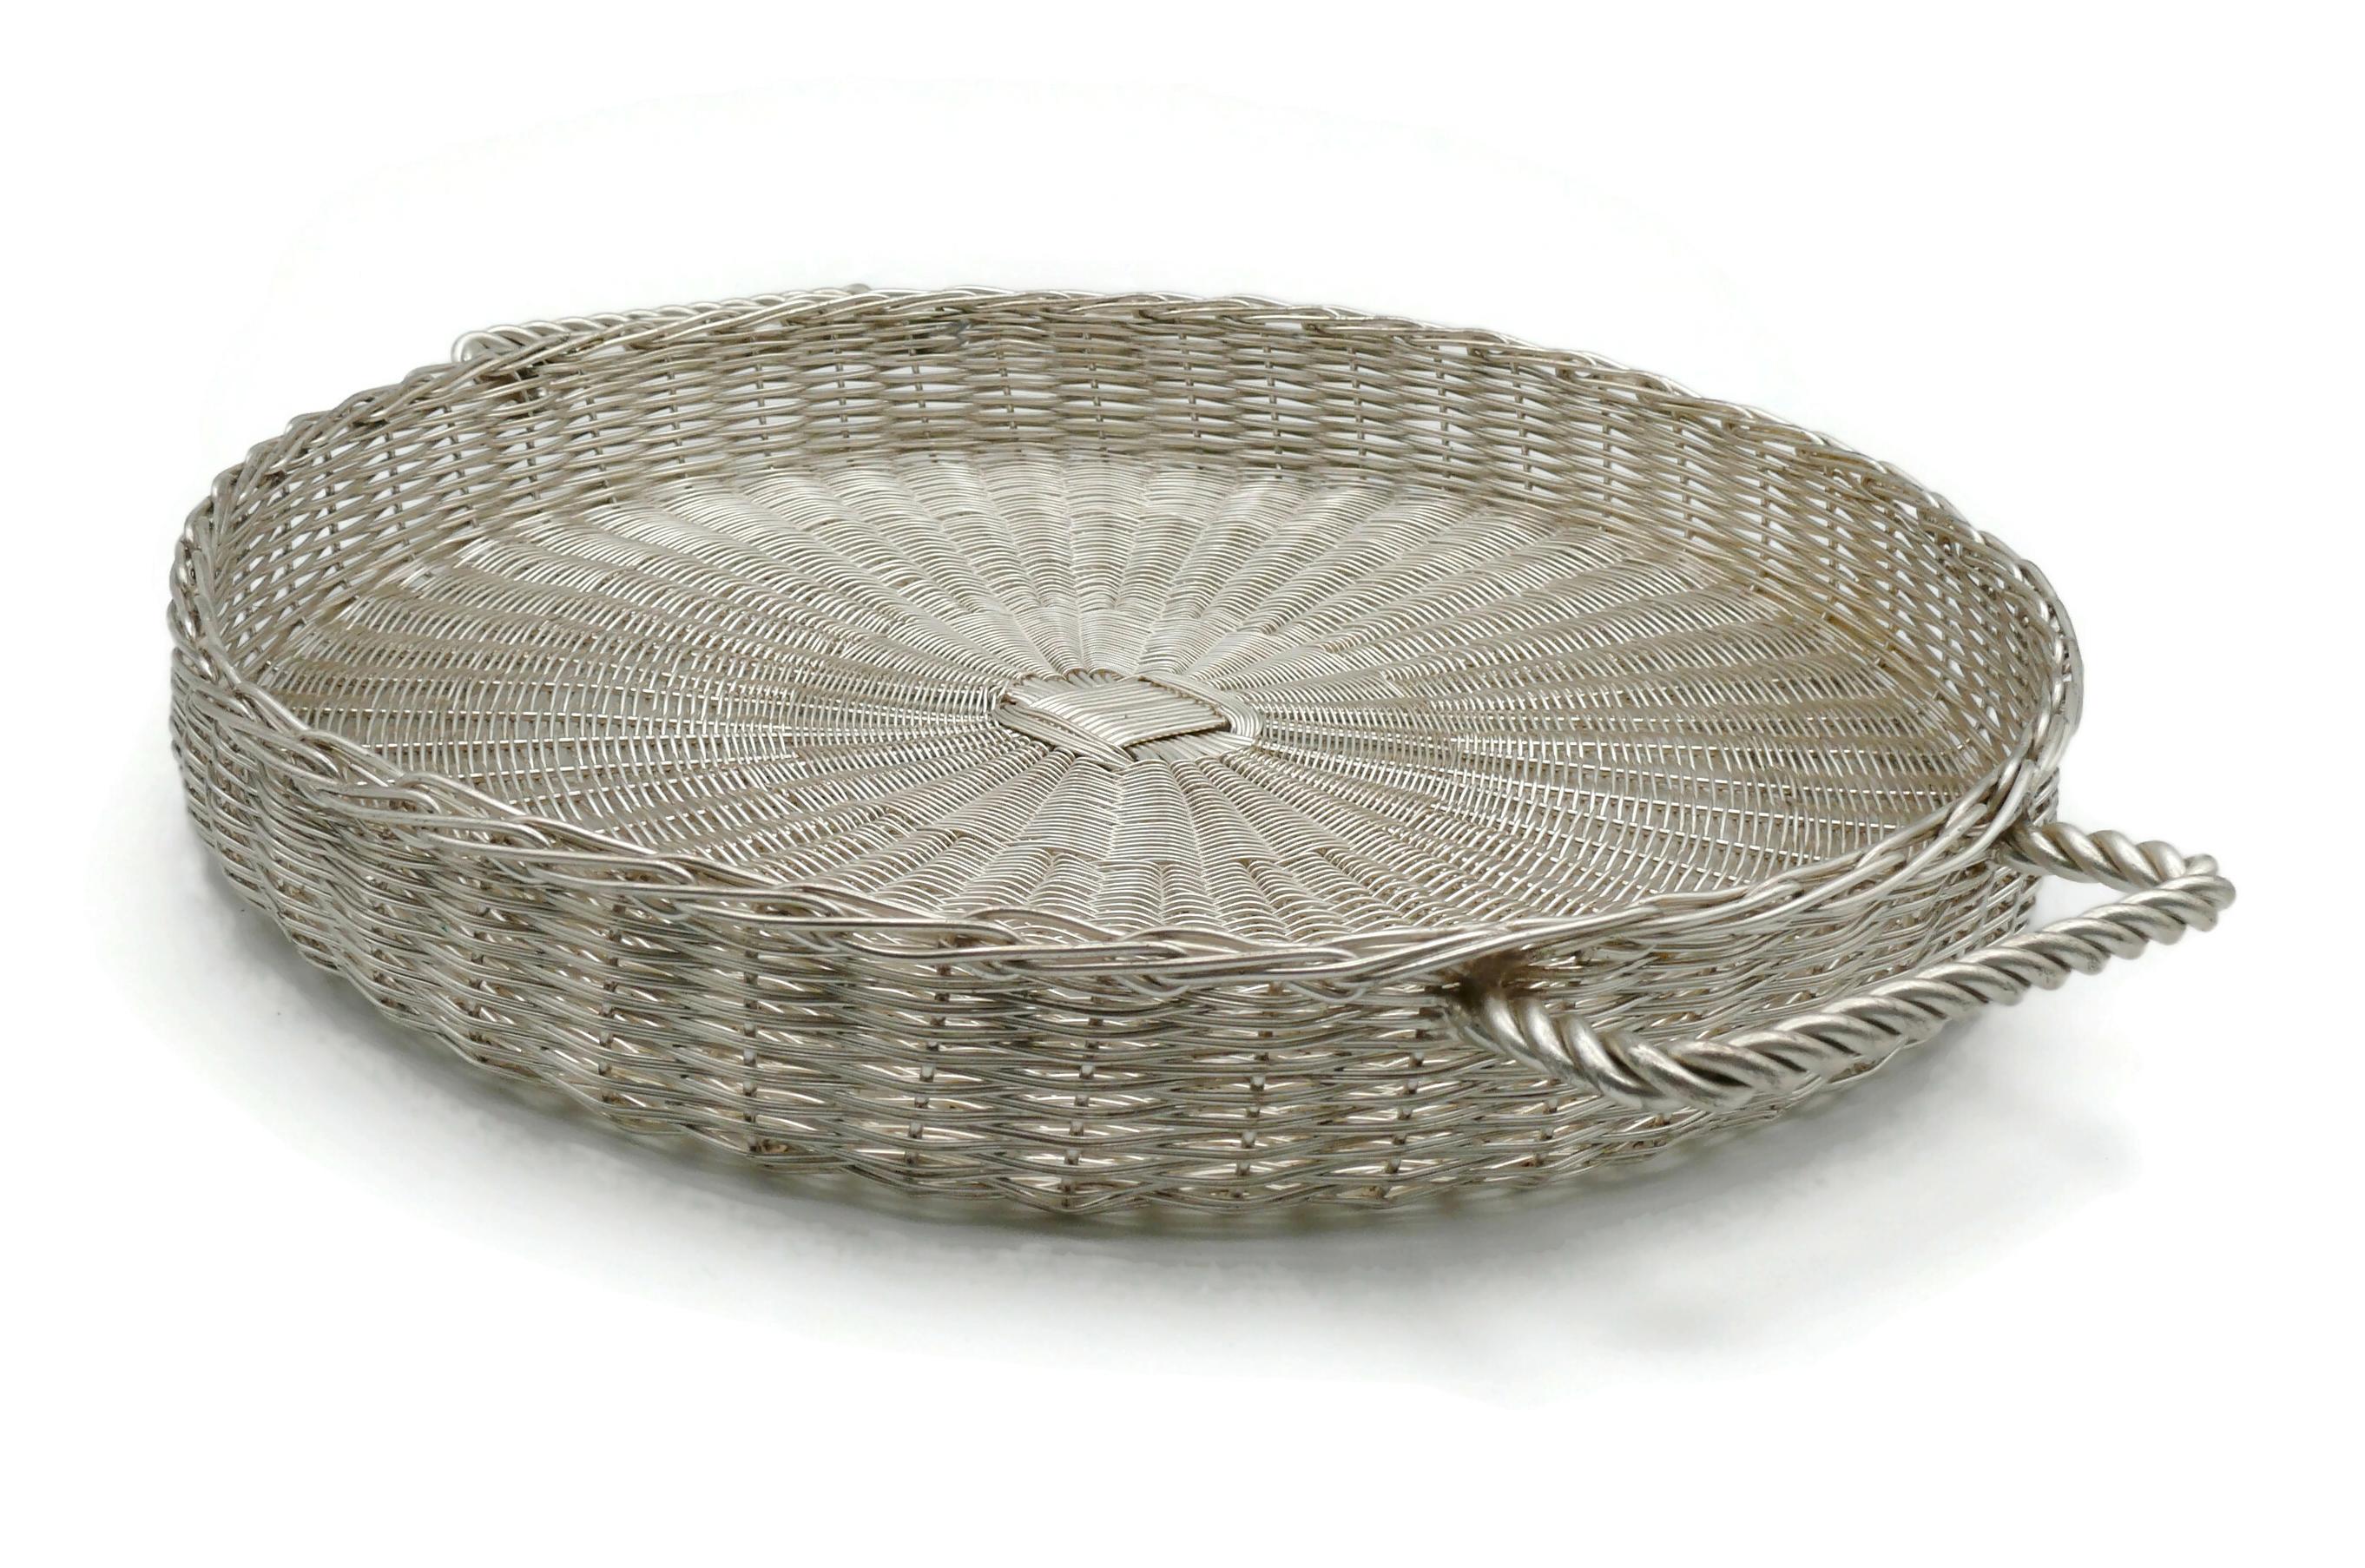 Women's or Men's CHRISTIAN DIOR Home Collection Vintage Silver Plated Wicker Style Basket